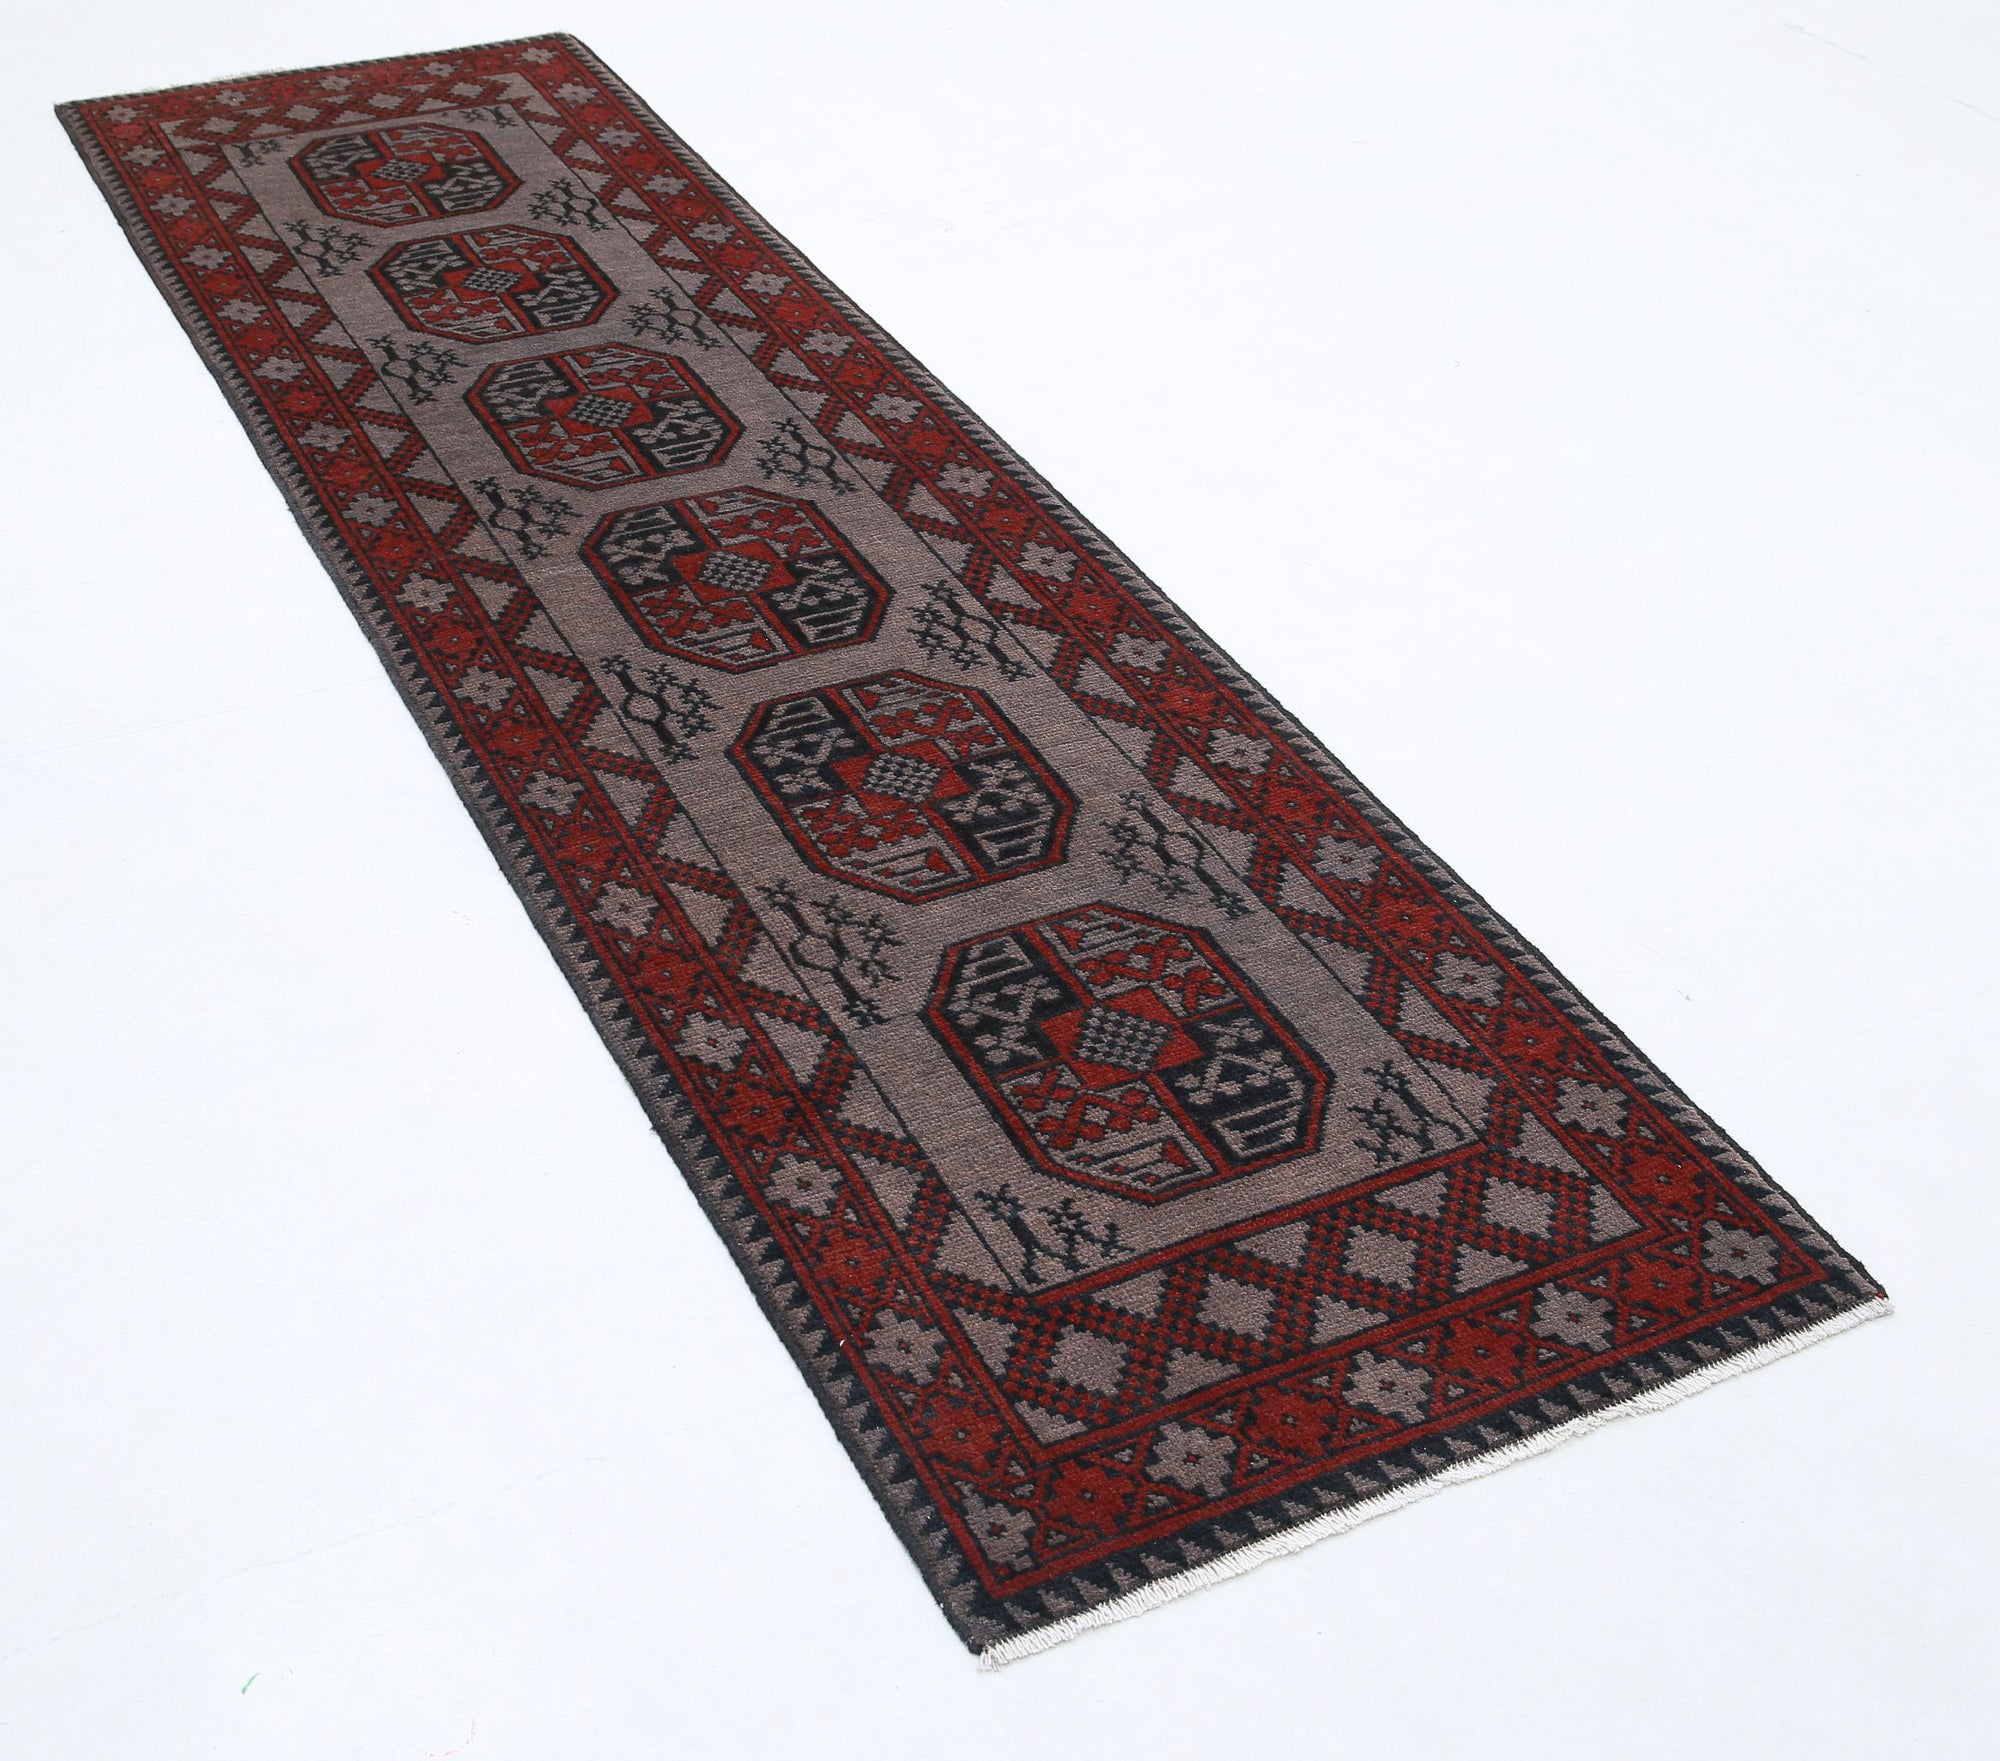 Revival-hand-knotted-gul-collection-wool-rug-5013988-1.jpg